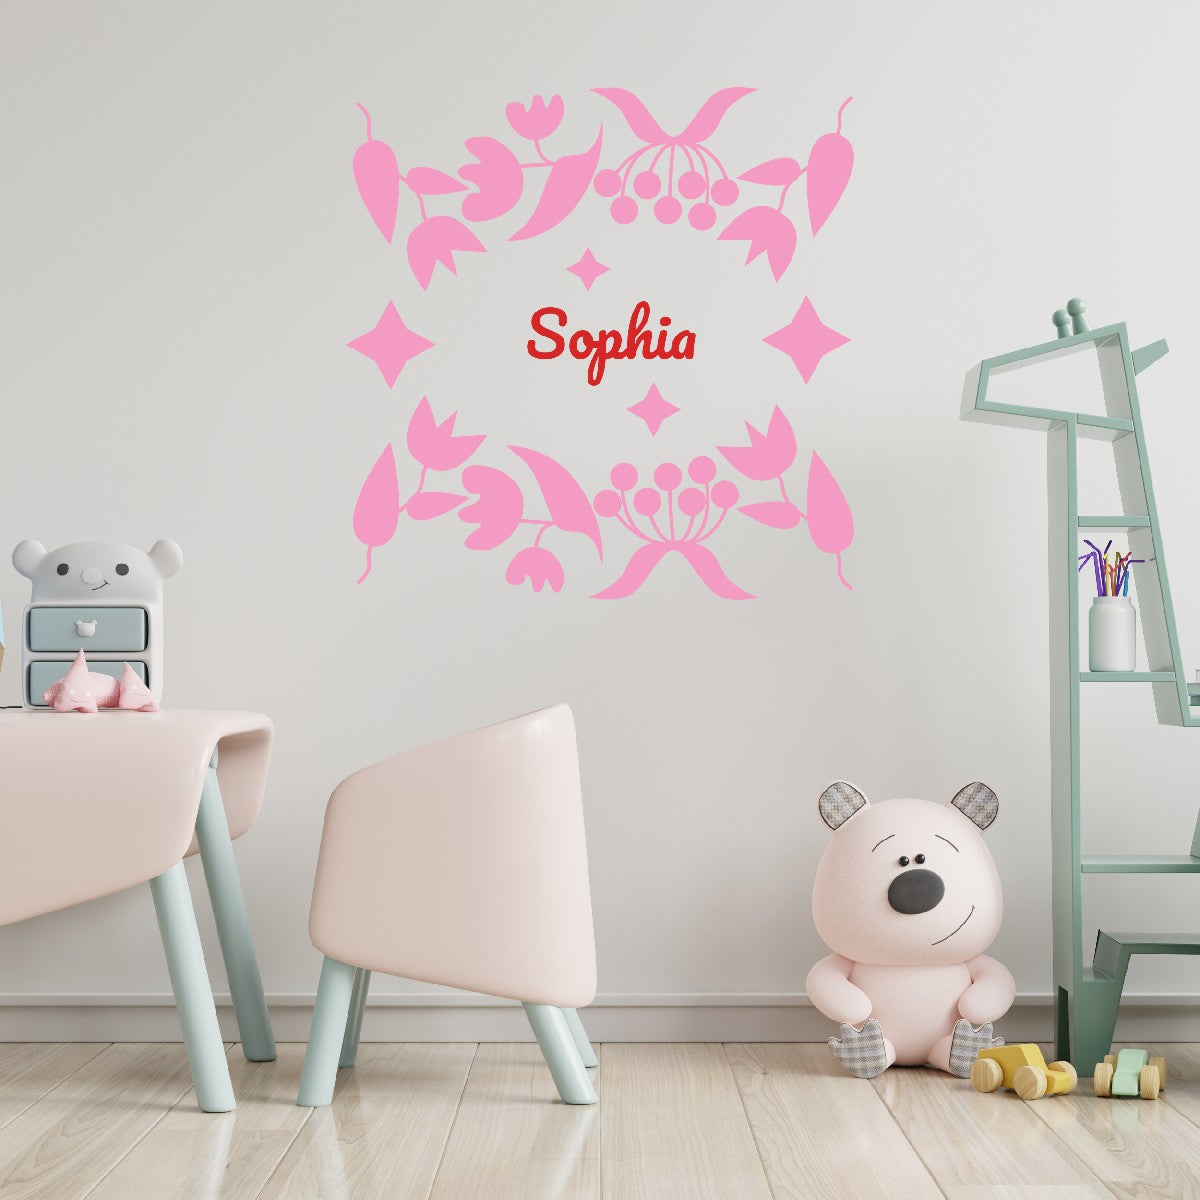 Personalized Name Stickers with Flowers Berries Leaves - Durable Name Decals for Walls Doors Furniture Laptop - Modern Custom Name Stickers for Kids Bedroom